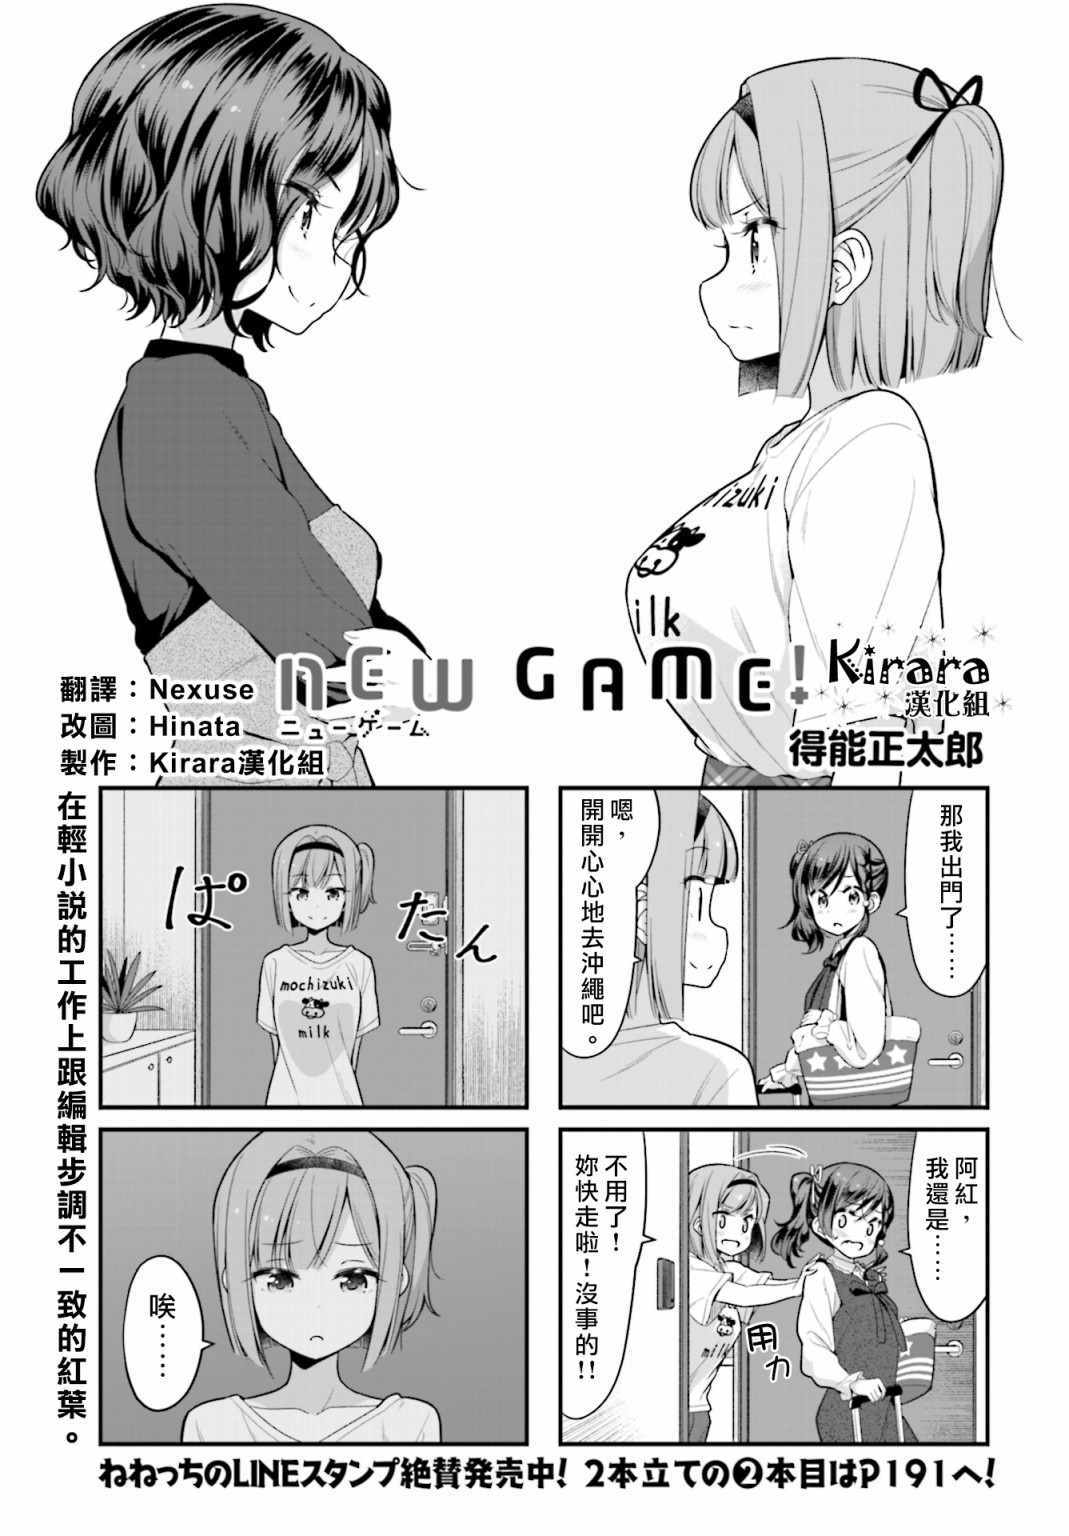 New Game 漫畫new Game 113集 第1頁 New Game New Game 113集劇情 看漫畫